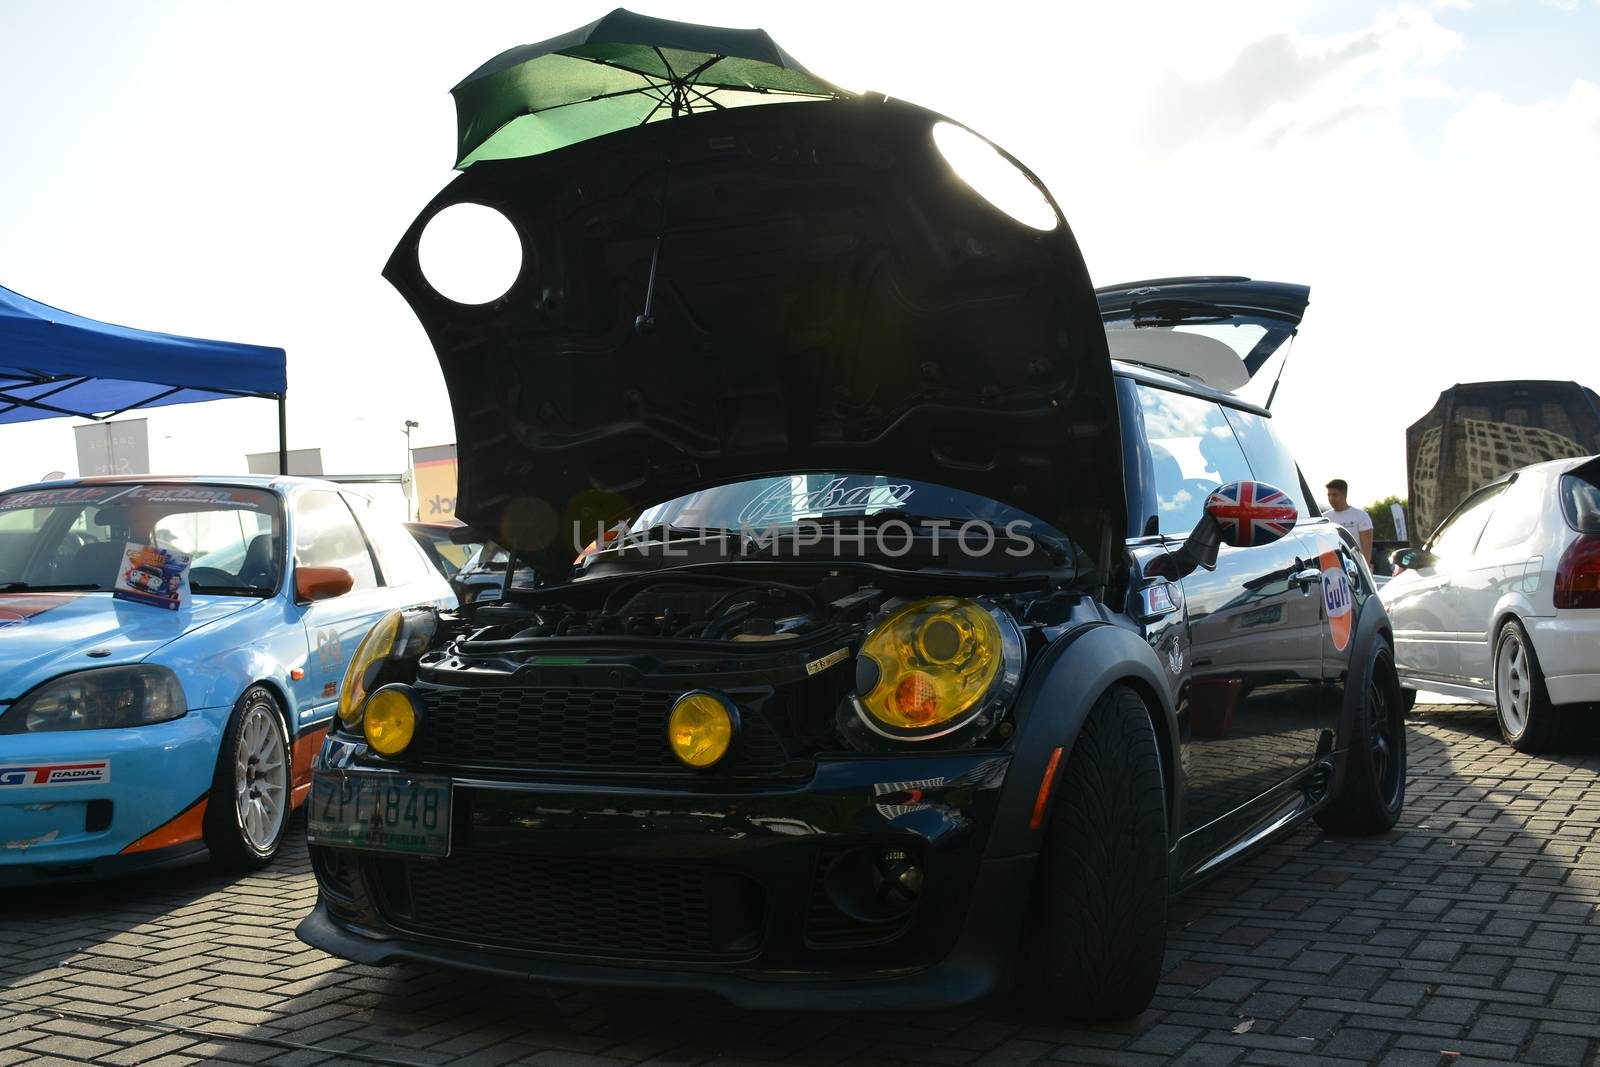 PASAY, PH - DEC 8 - Mini cooper at Bumper to Bumper car show on December 8, 2018 in Pasay, Philippines.